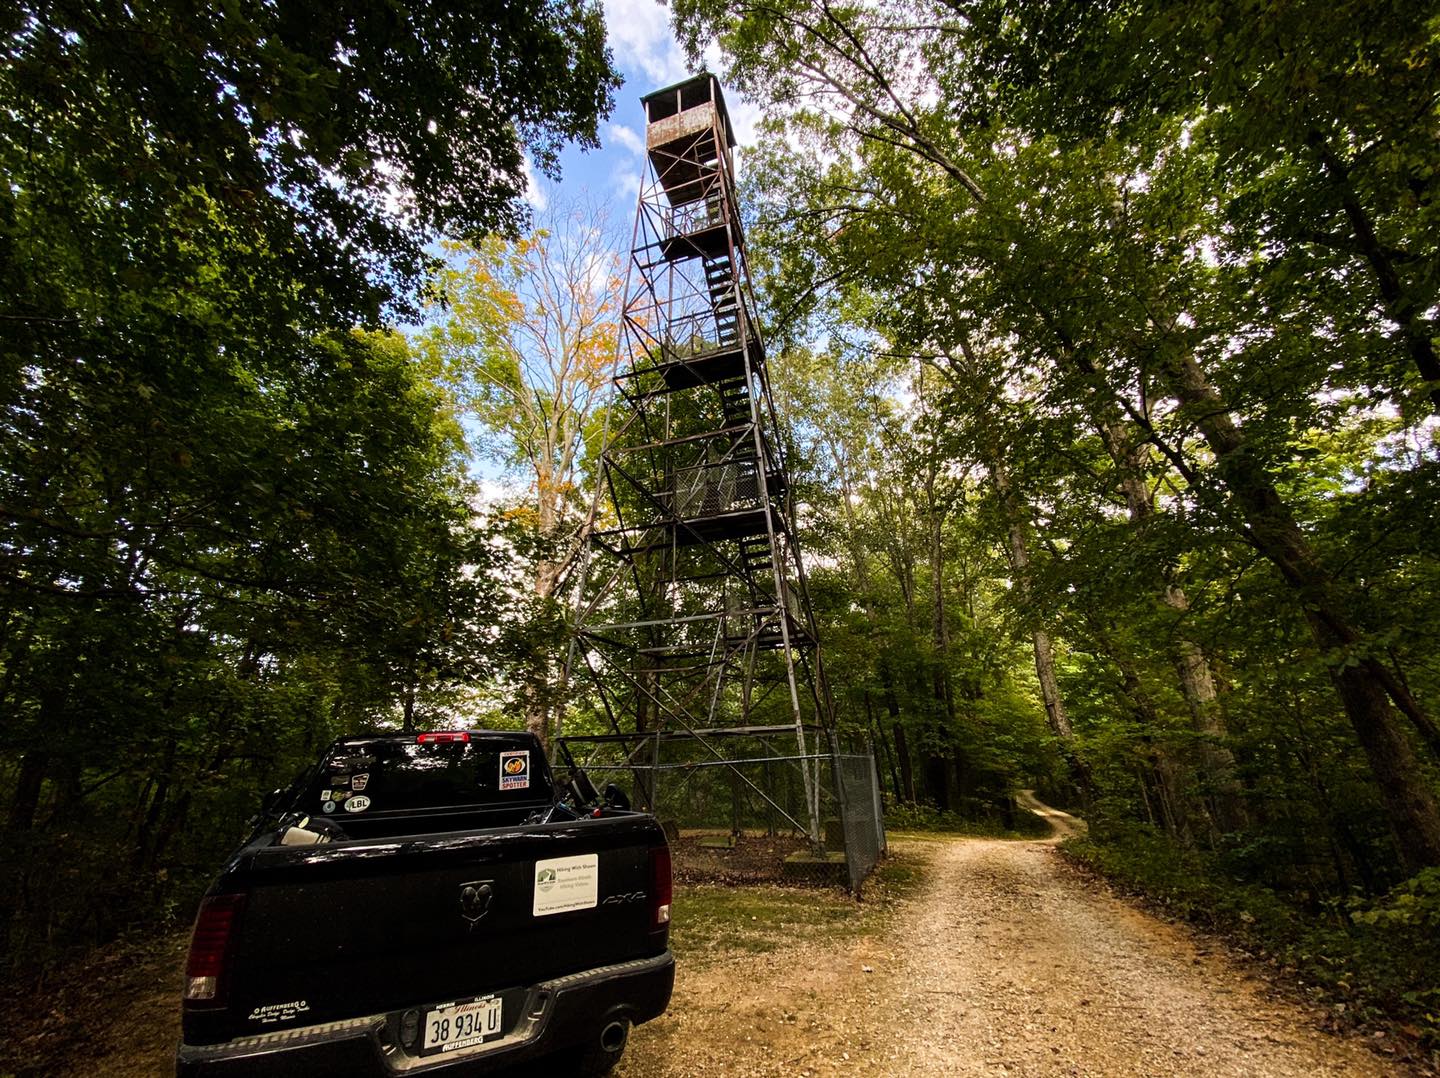 Union Lookout Tower